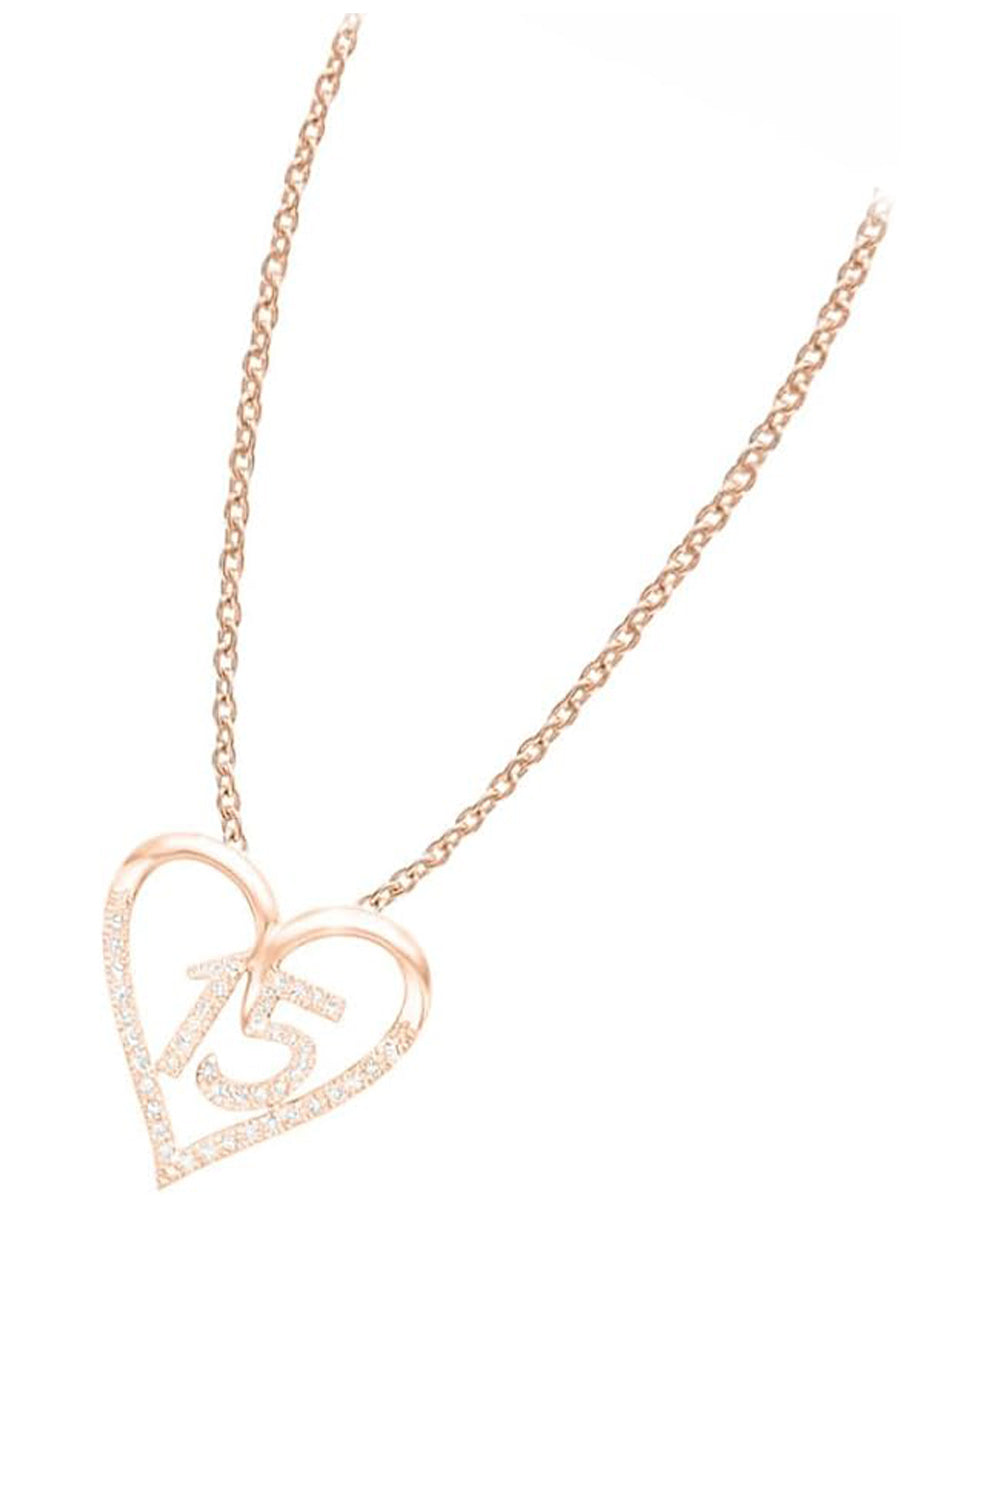 Rose Gold Color 15 Years Love Heart Pendant Necklace, Buy Pendants Online 